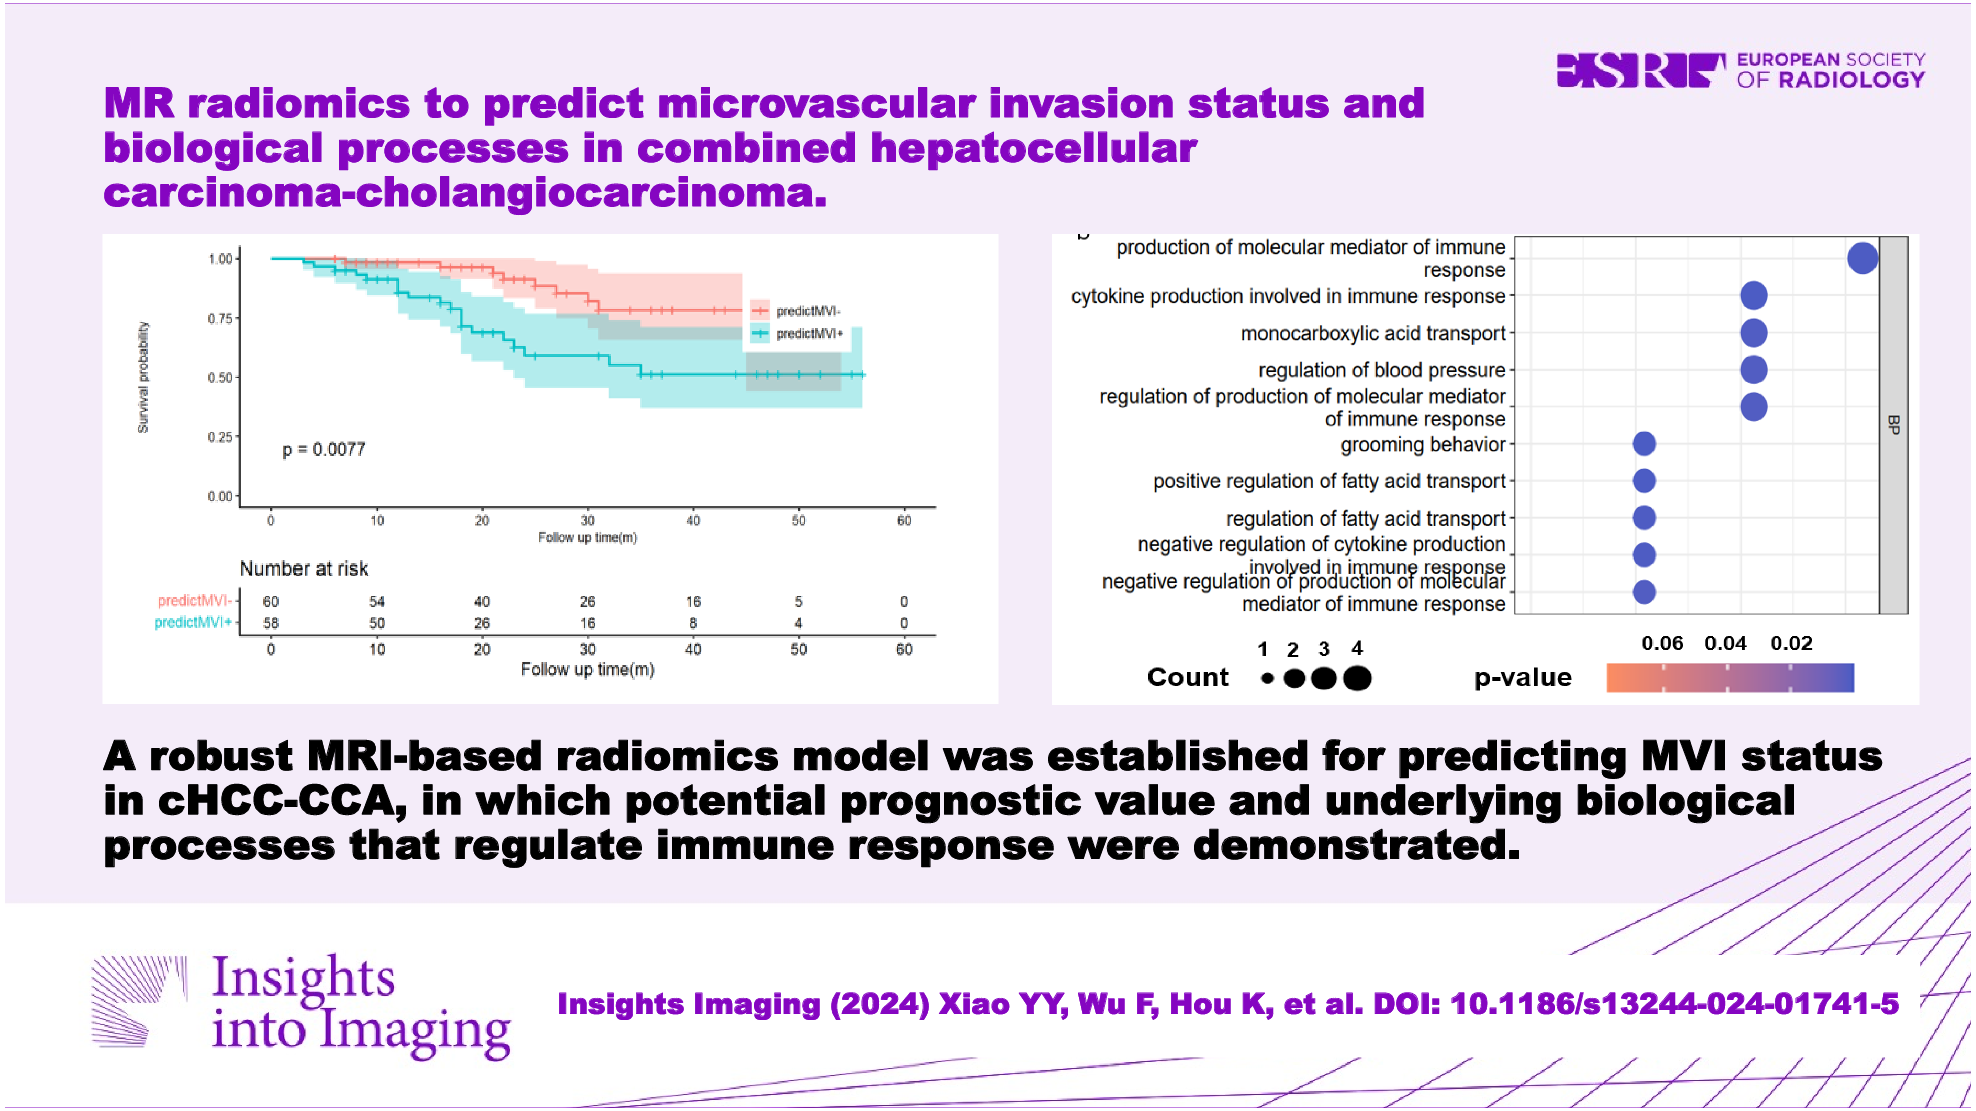 MR radiomics to predict microvascular invasion status and biological process in combined hepatocellular carcinoma-cholangiocarcinoma